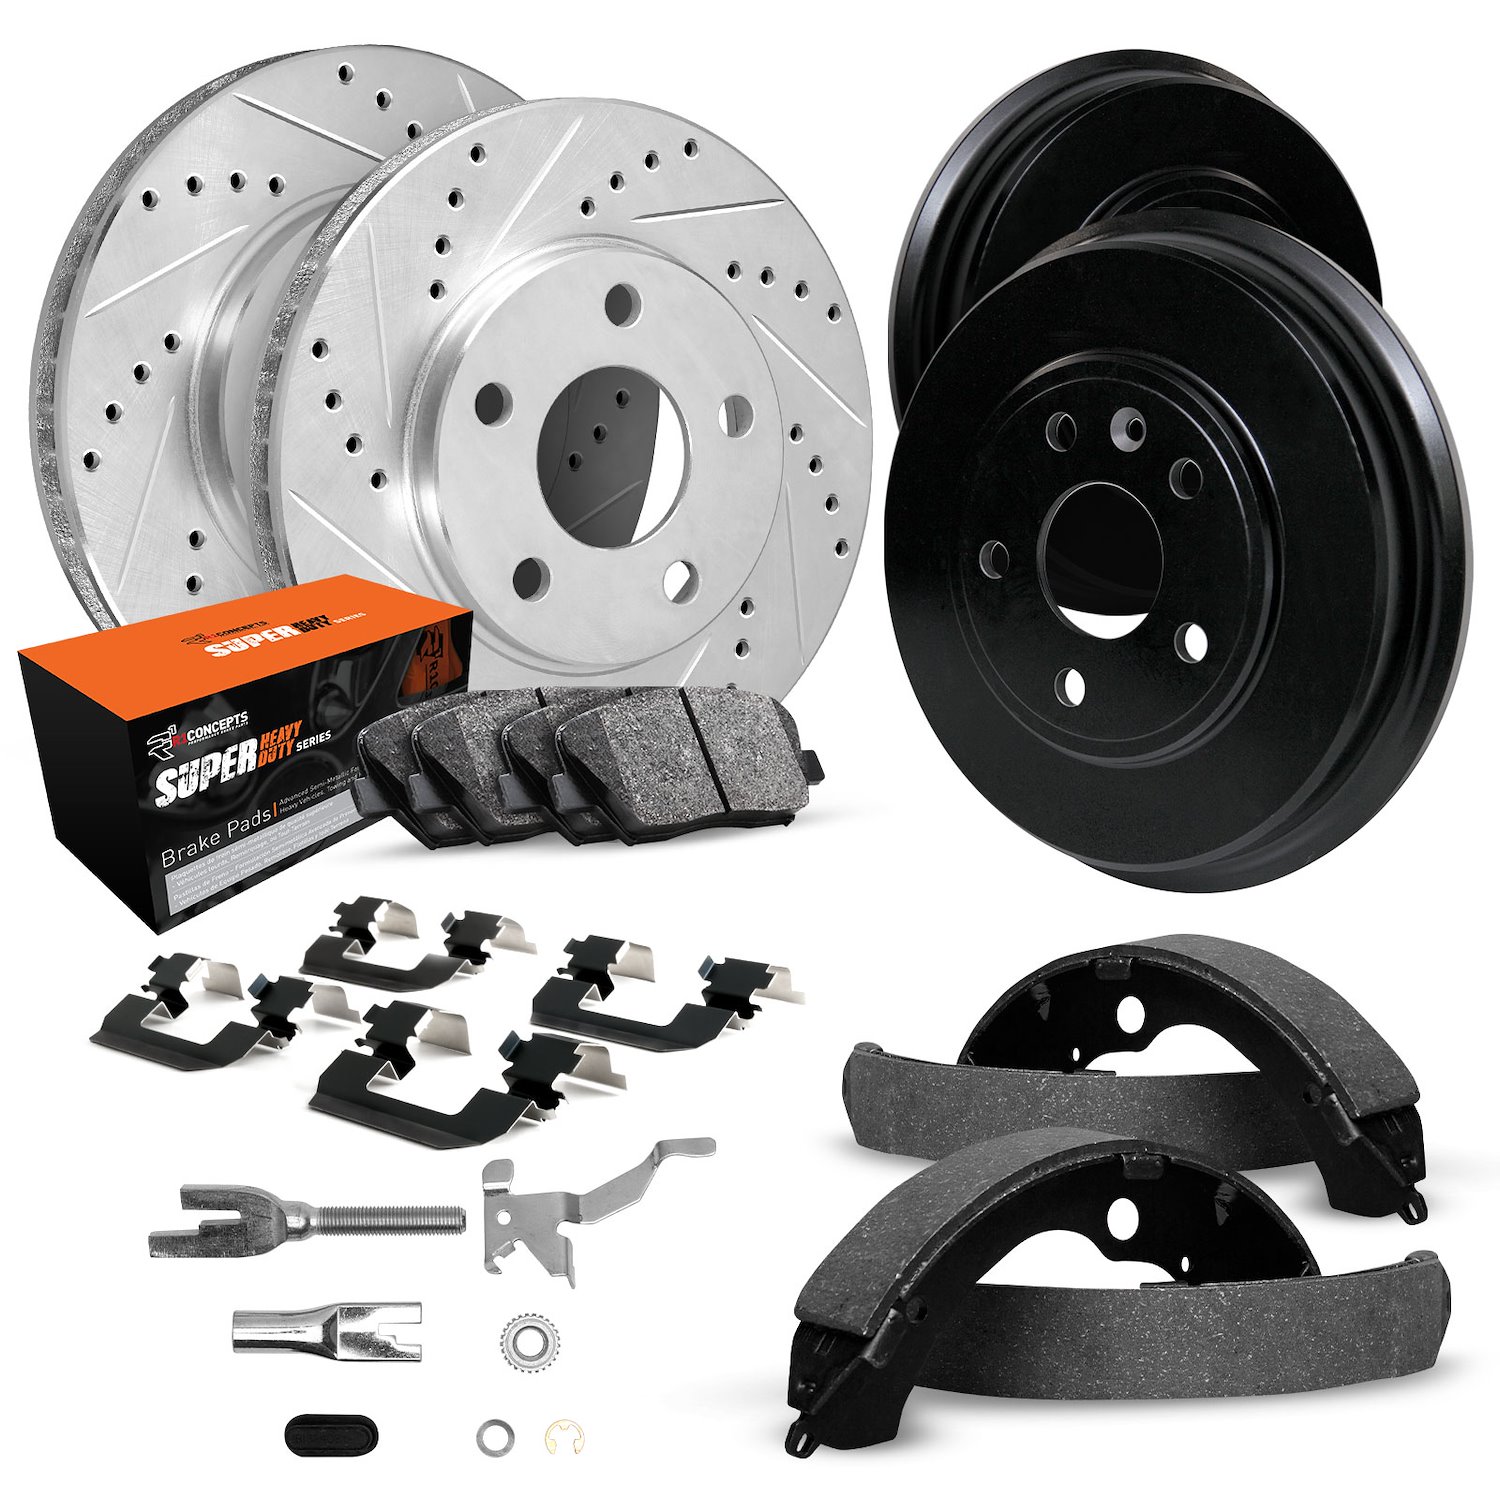 E-Line Drilled/Slotted Silver Rotor & Drum Set w/Super-Duty Pads, Shoes/Hardware/Adjusters, 1997-1999 Ford/Lincoln/Mercury/Mazda